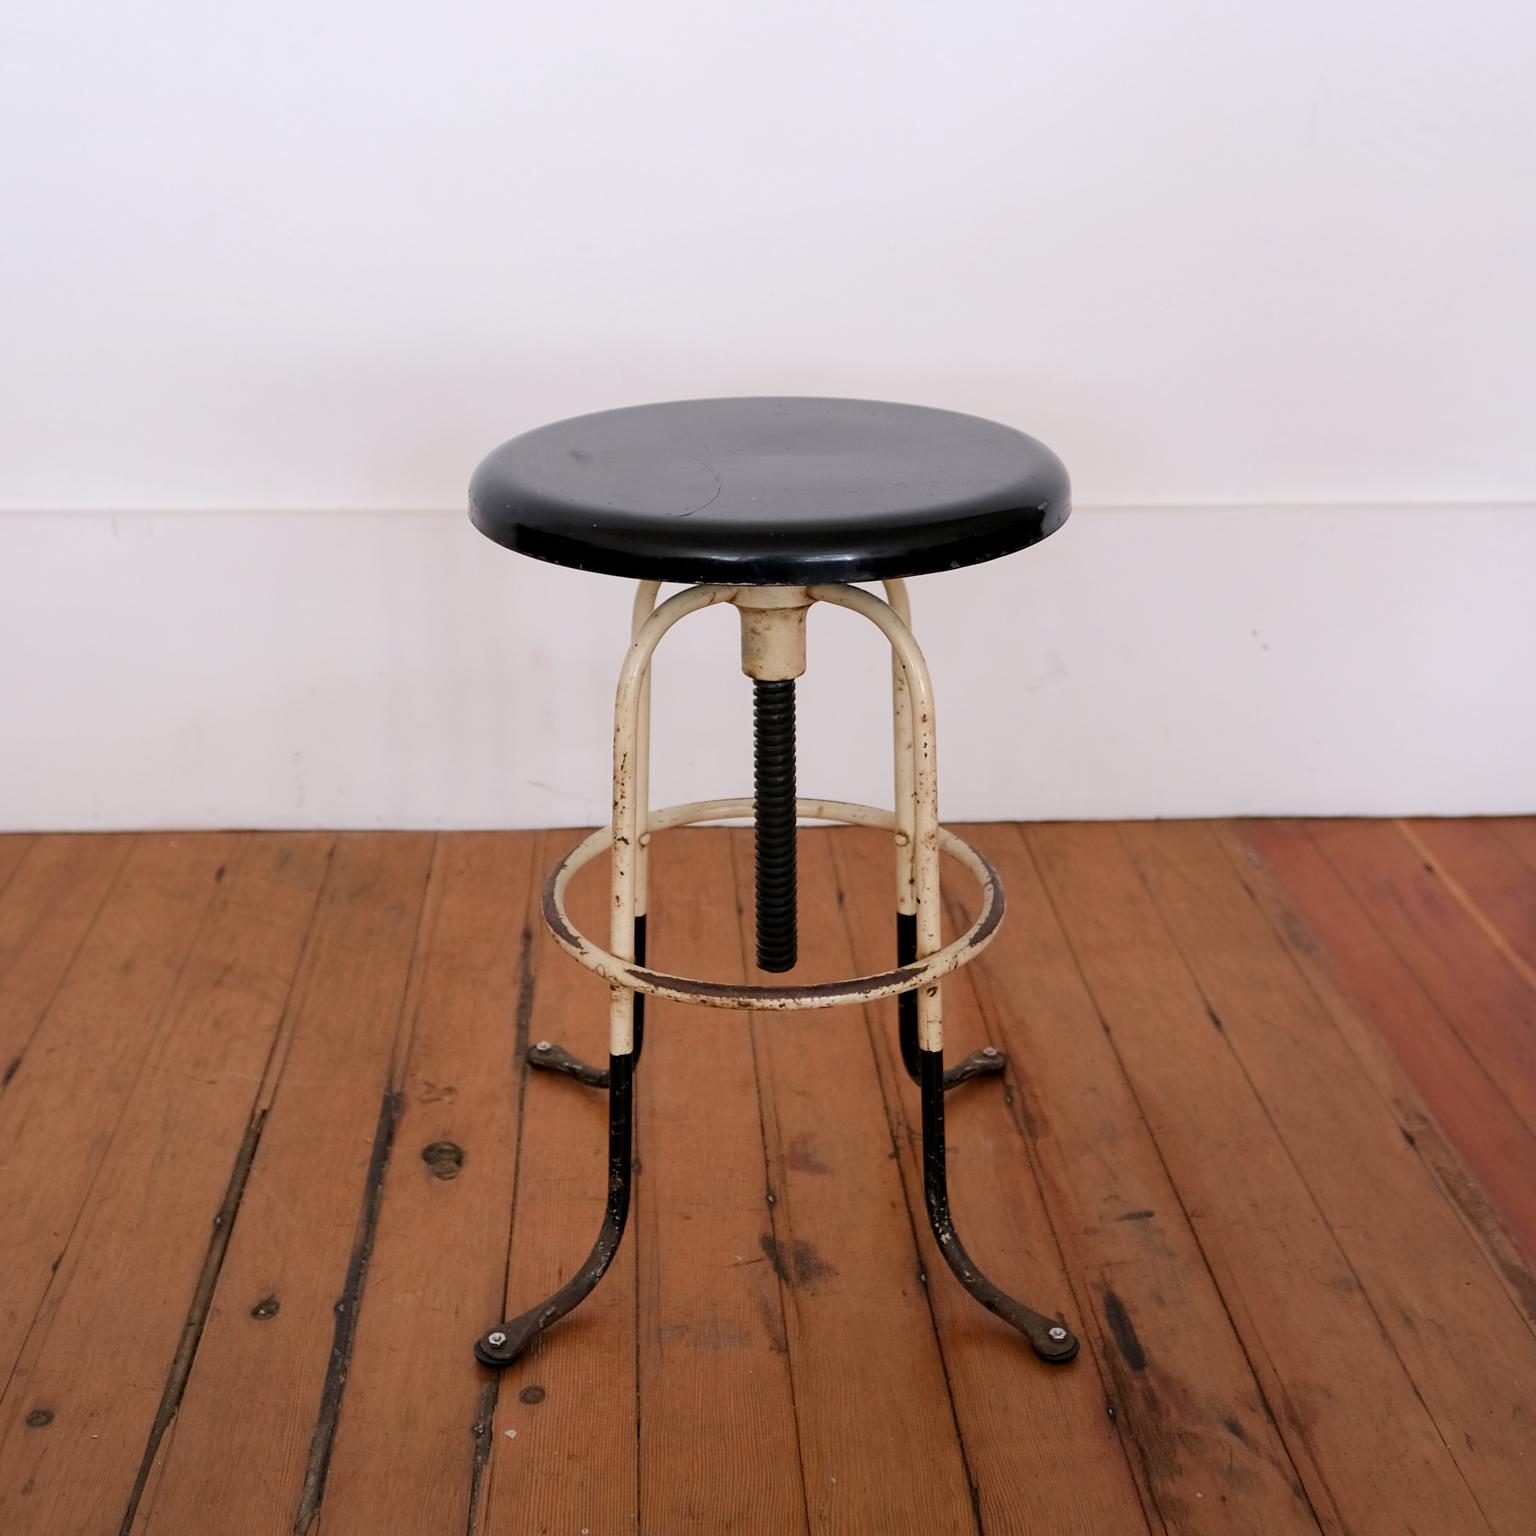 Solid steel adjustable height stool. Rotating seat raises and lowers the height from 18